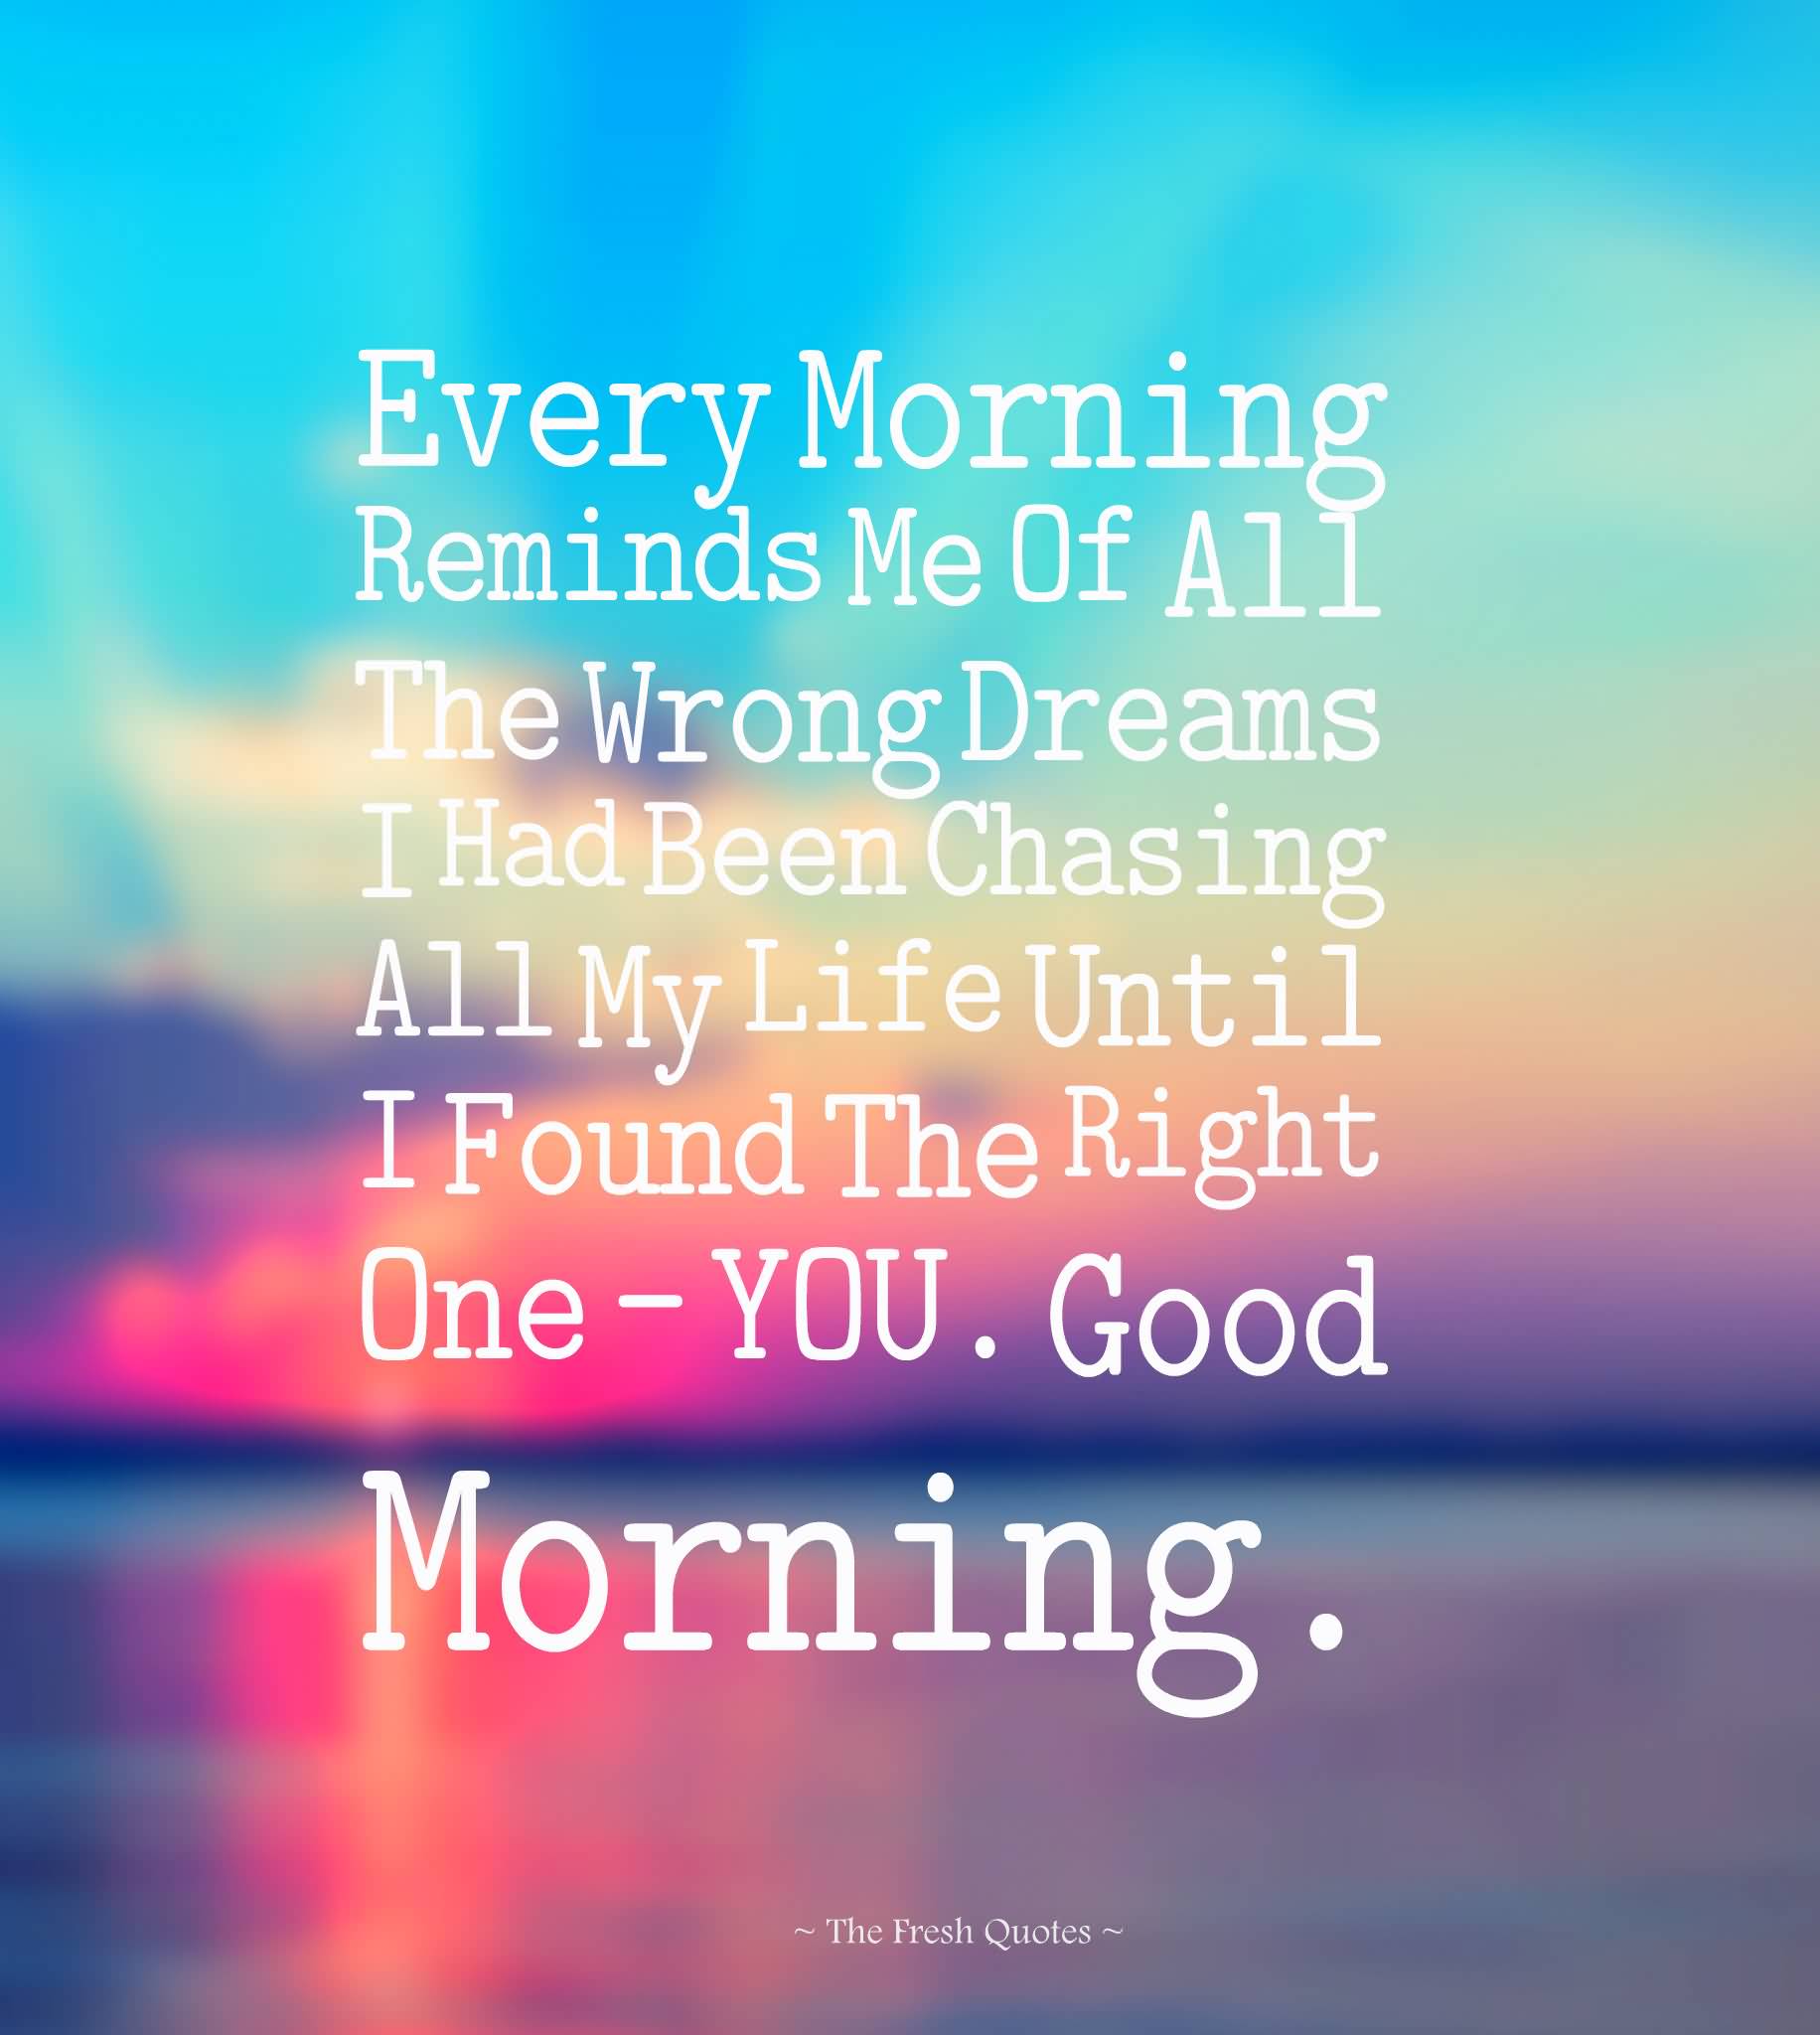 Morning Quotes For Loved Ones 16